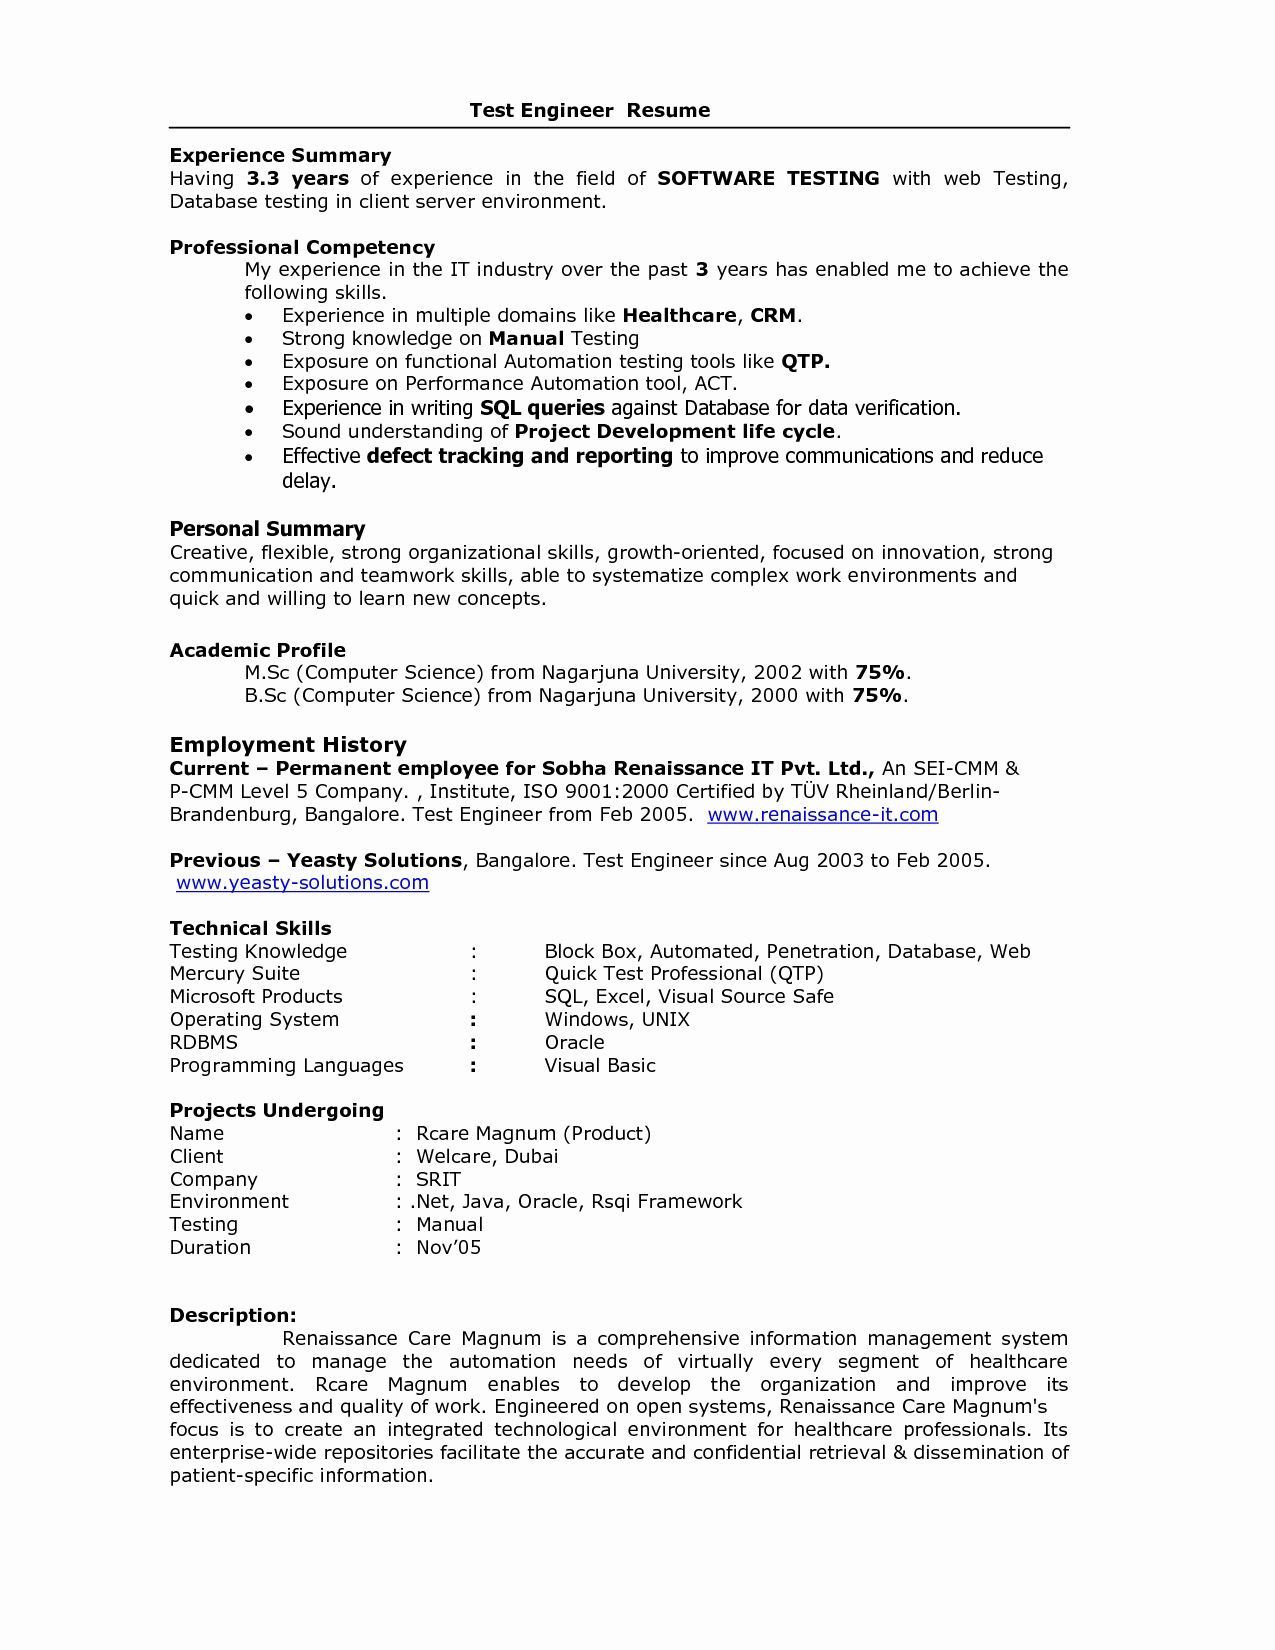 Sample Resume for 2 Years Experience In Manual Testing Hr Resume Sample for 2 Years Experience Best Resume Examples